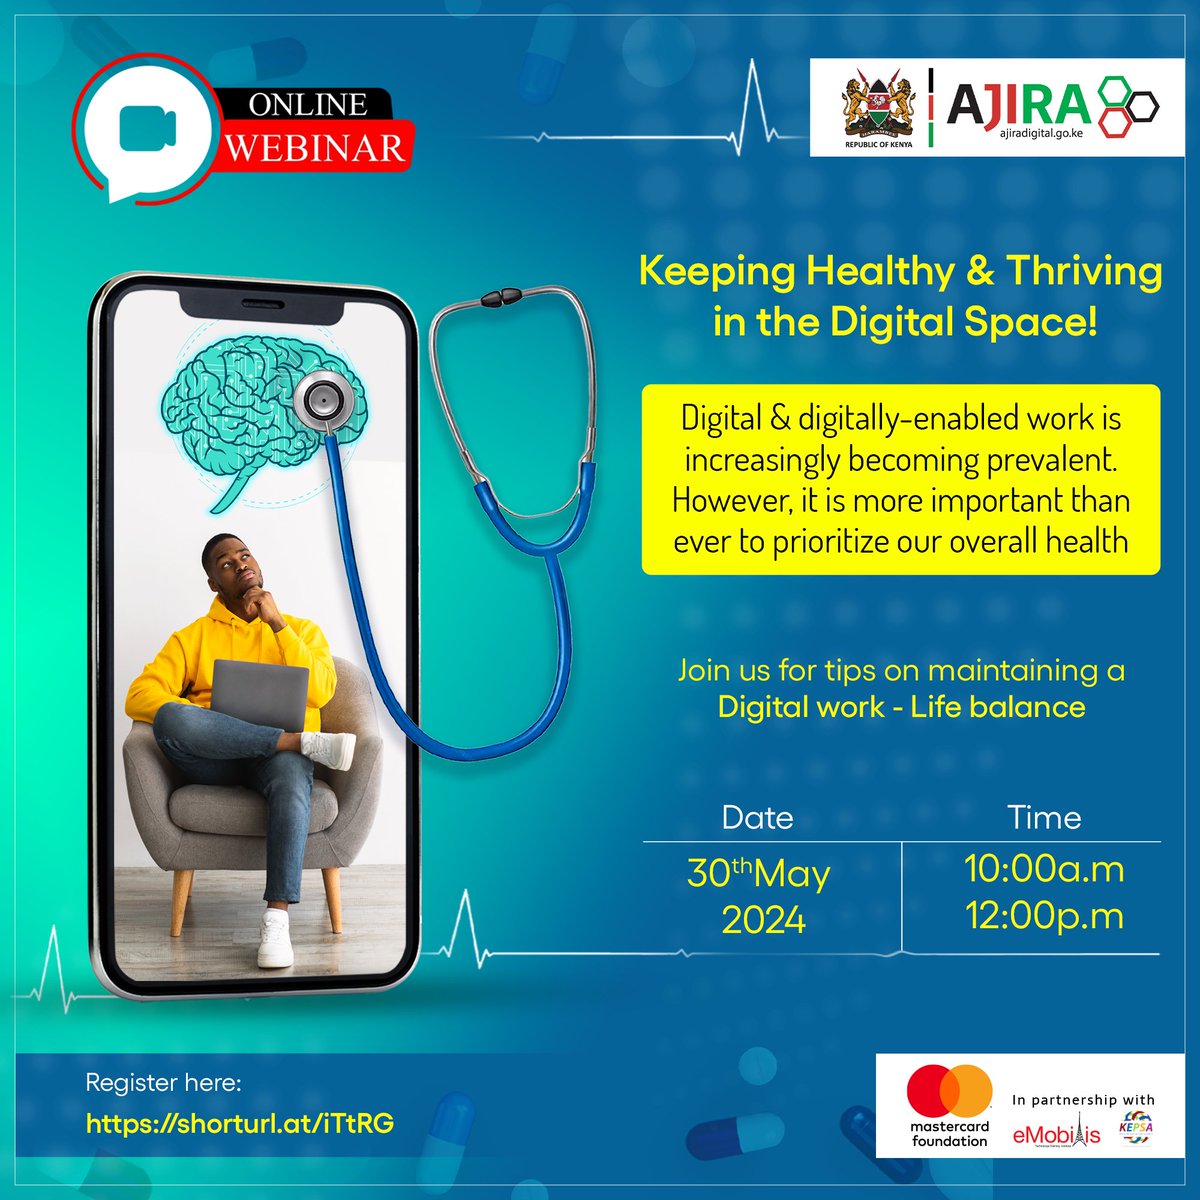 Join us for a special webinar focused on Mental Health and Physical Well-Being on 30th May 2024 from 10am- 12pm tailored specifically for digital work participants shorturl.at/iTtRG #digitalwork #mentalhealthawarenessmonth @AjiraDigital @MastercardFdn @eMobilis